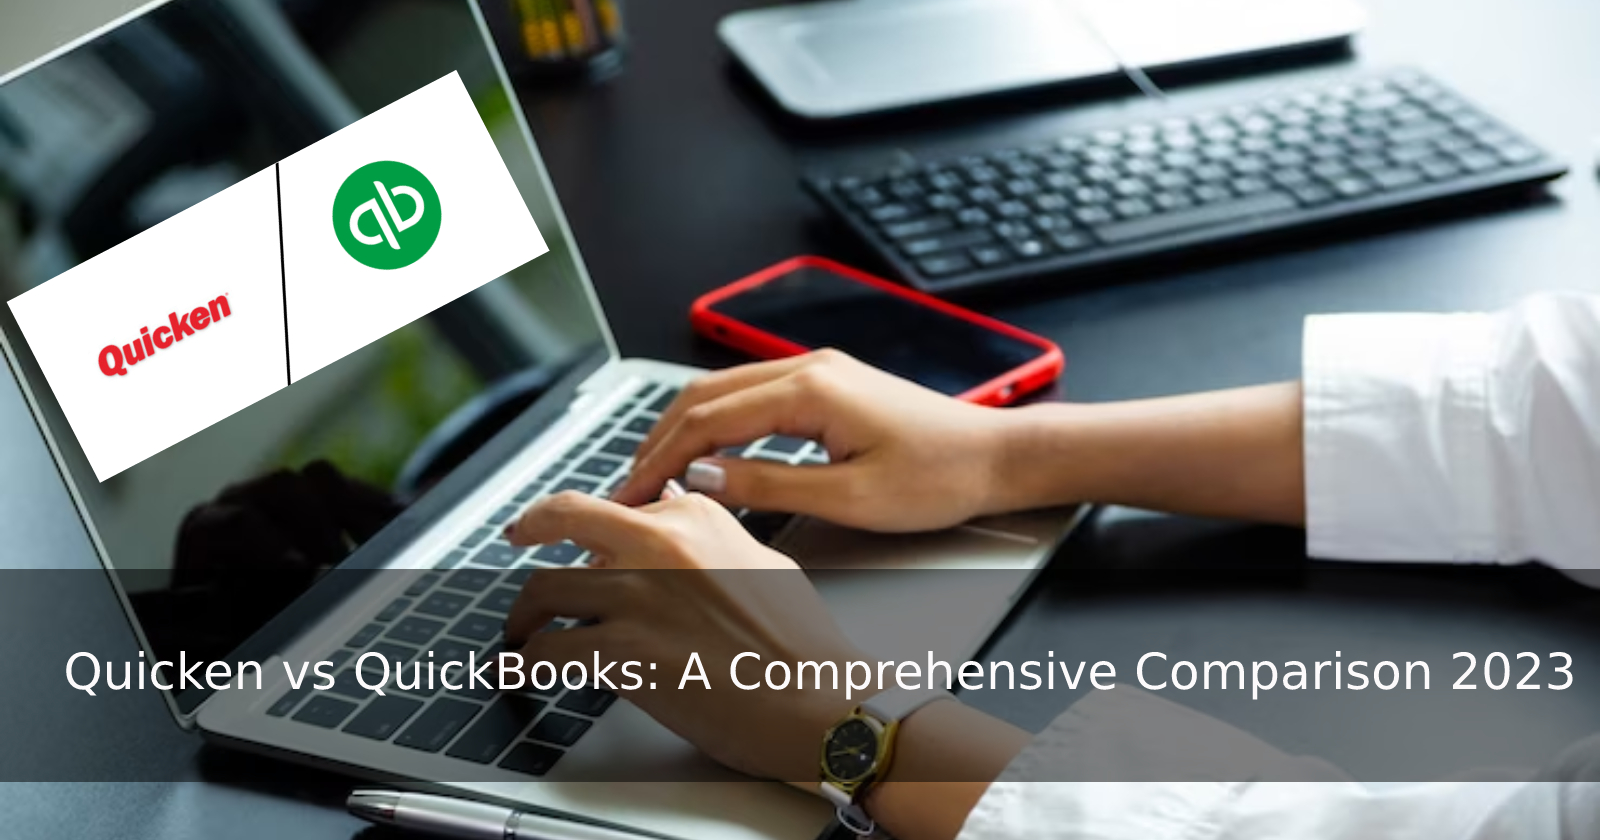 Quicken vs QuickBooks: Which is Better for Your Small Business?